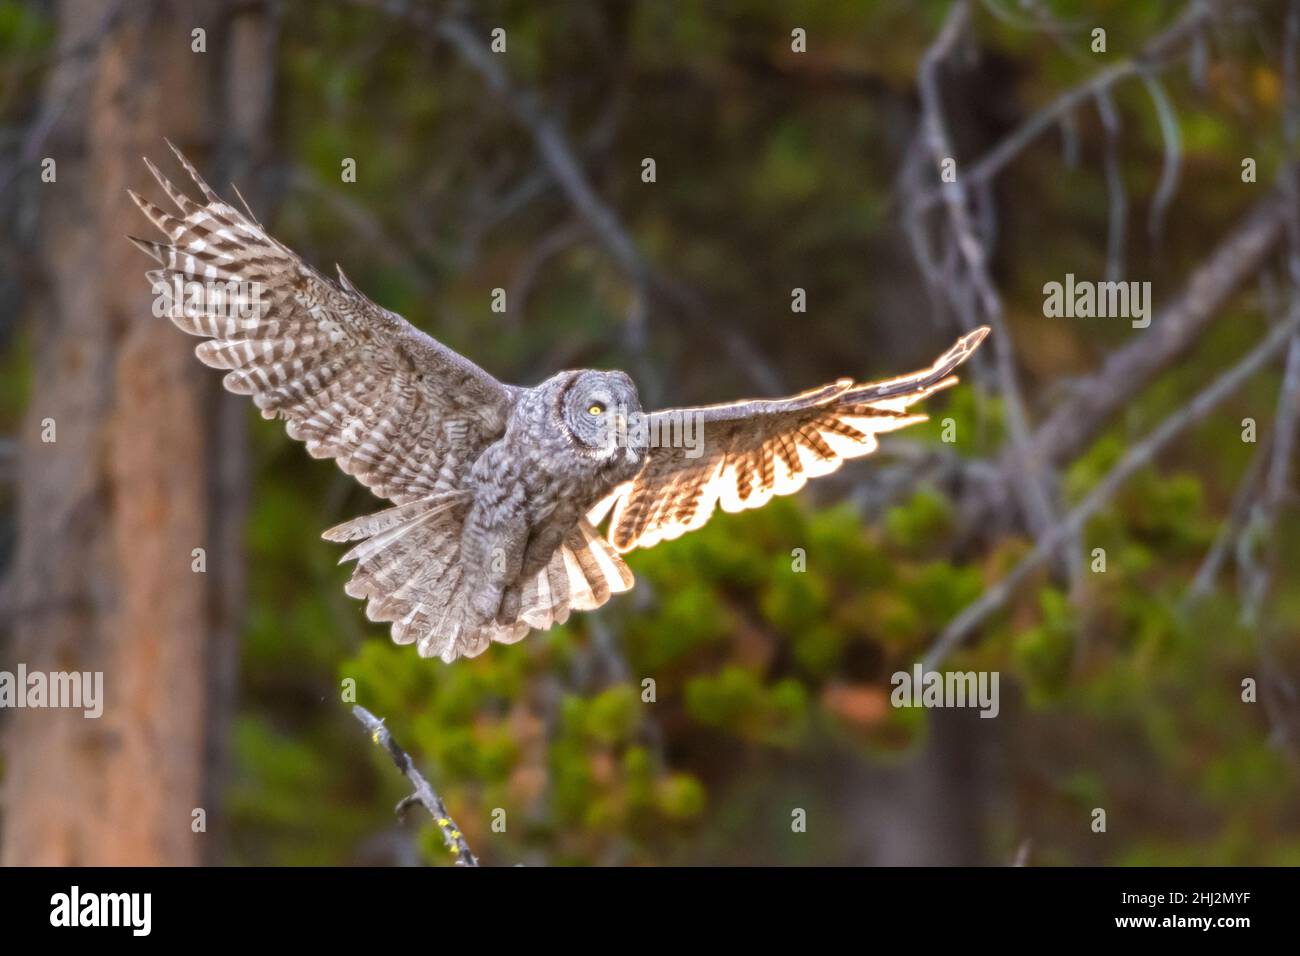 Great Gray Owl (Strix nebulosa) in flight.  September in Yellowstone National Park, Wyoming. Stock Photo